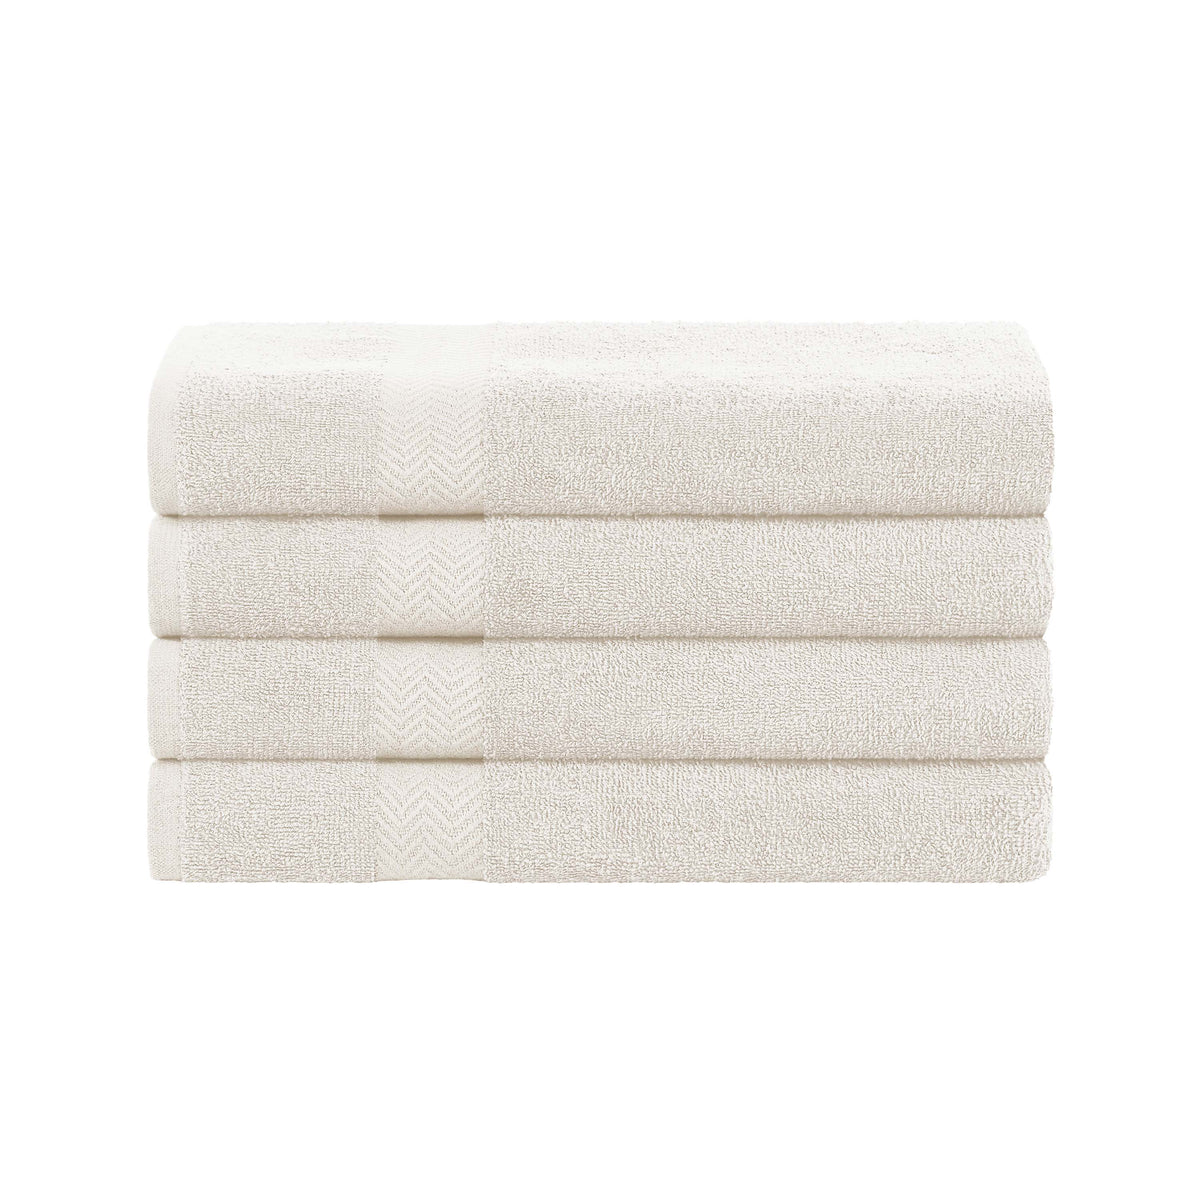 Cotton Highly Absorbent Eco-Friendly Quick Dry 4 Piece Bath Towel Set